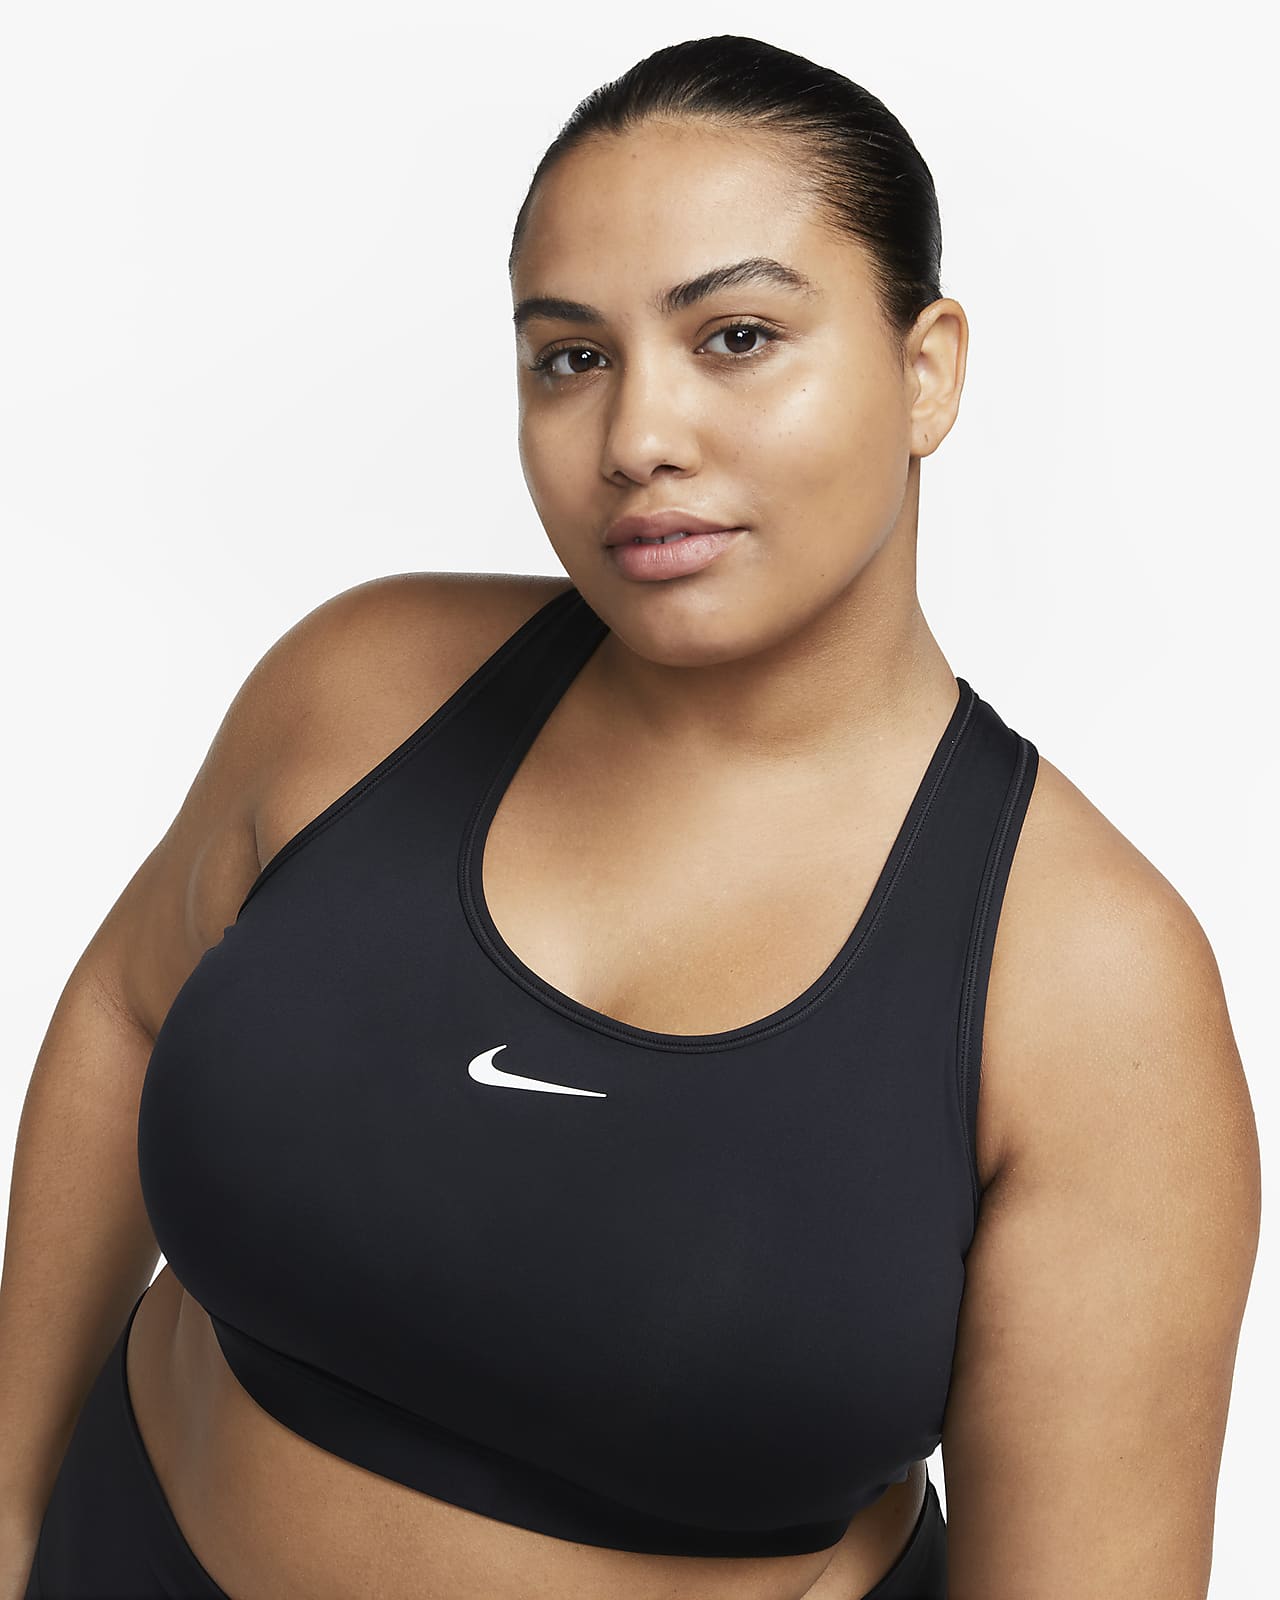 How to Find the Best Padded Sports Bra for Small Chest – The Streets